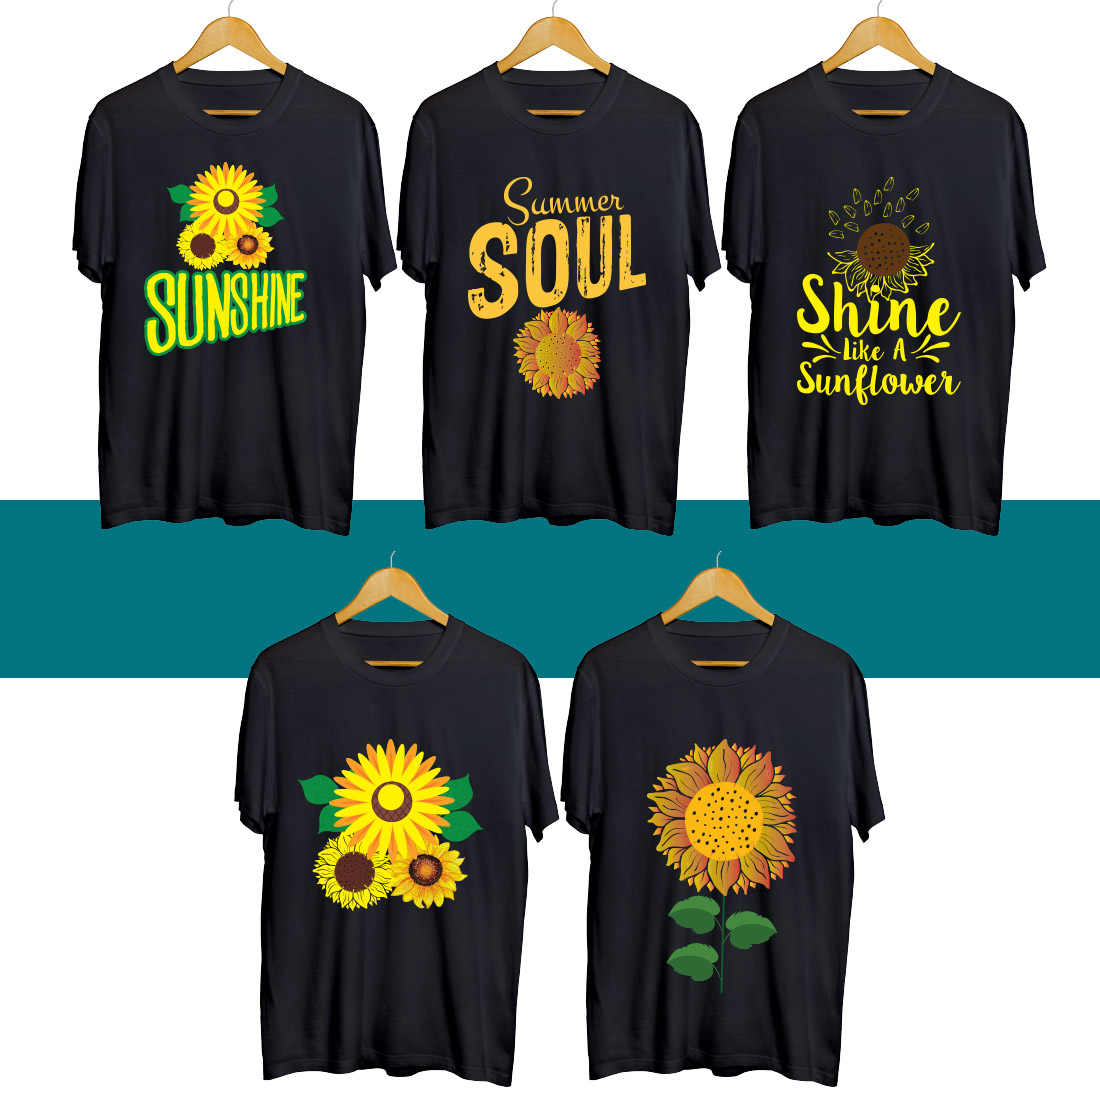 Four t - shirts with sunflowers on them.